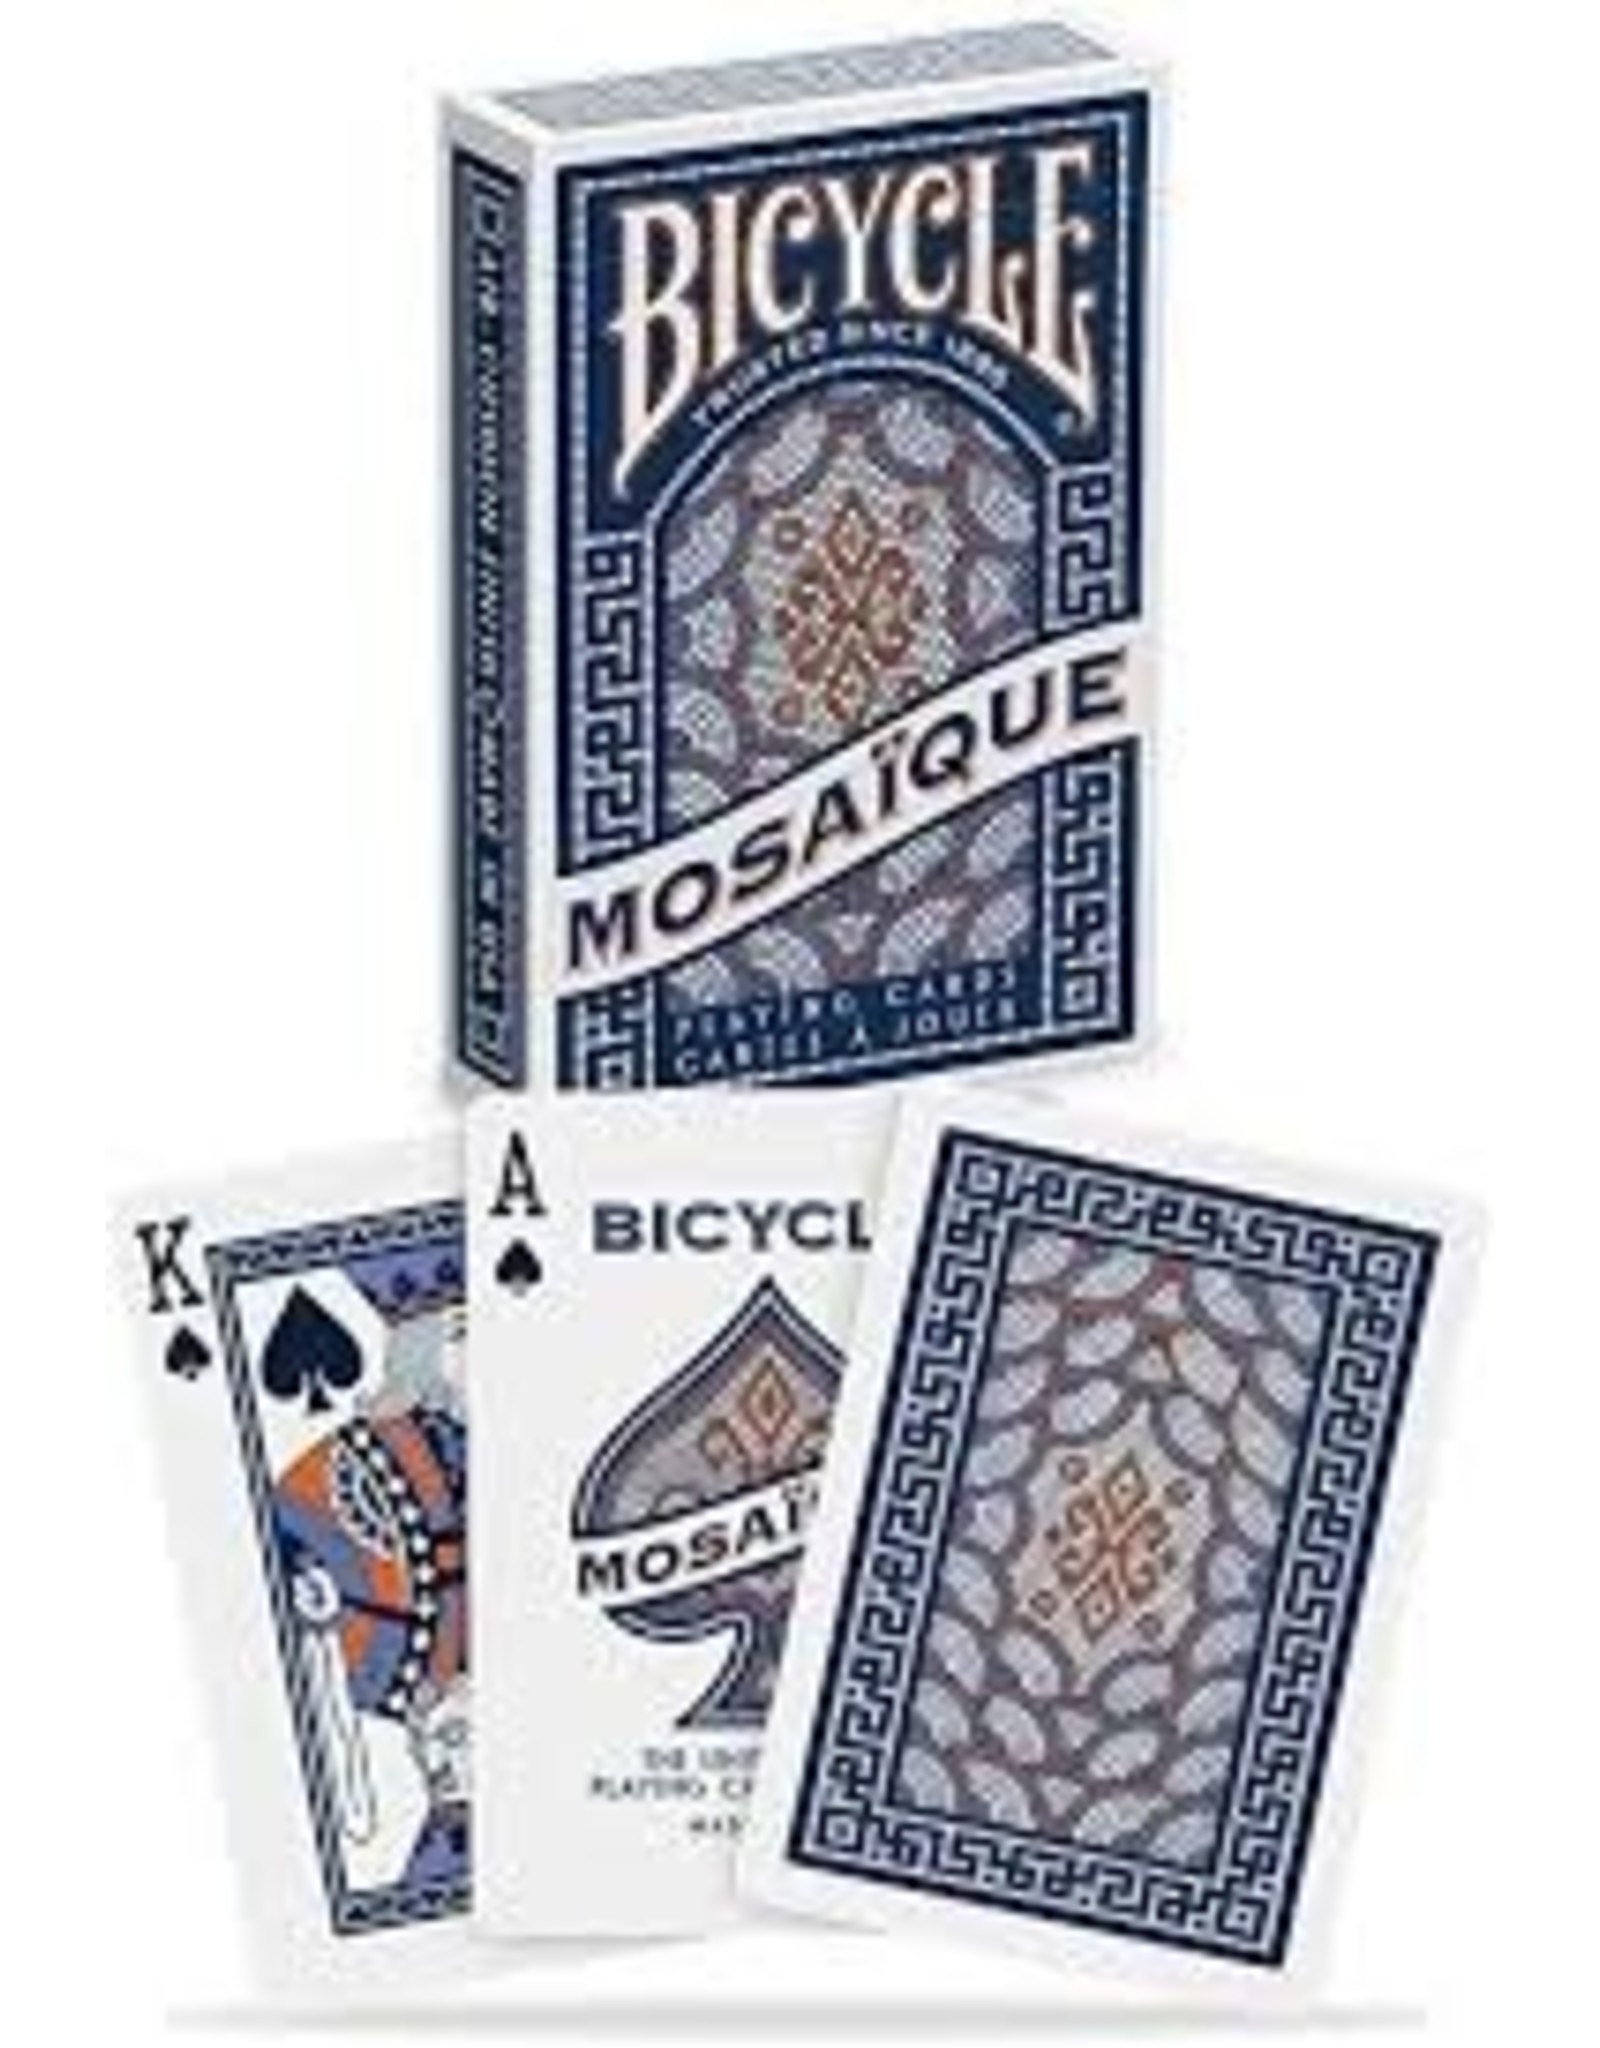 US Playing Card Co. Bicycle Mosaique